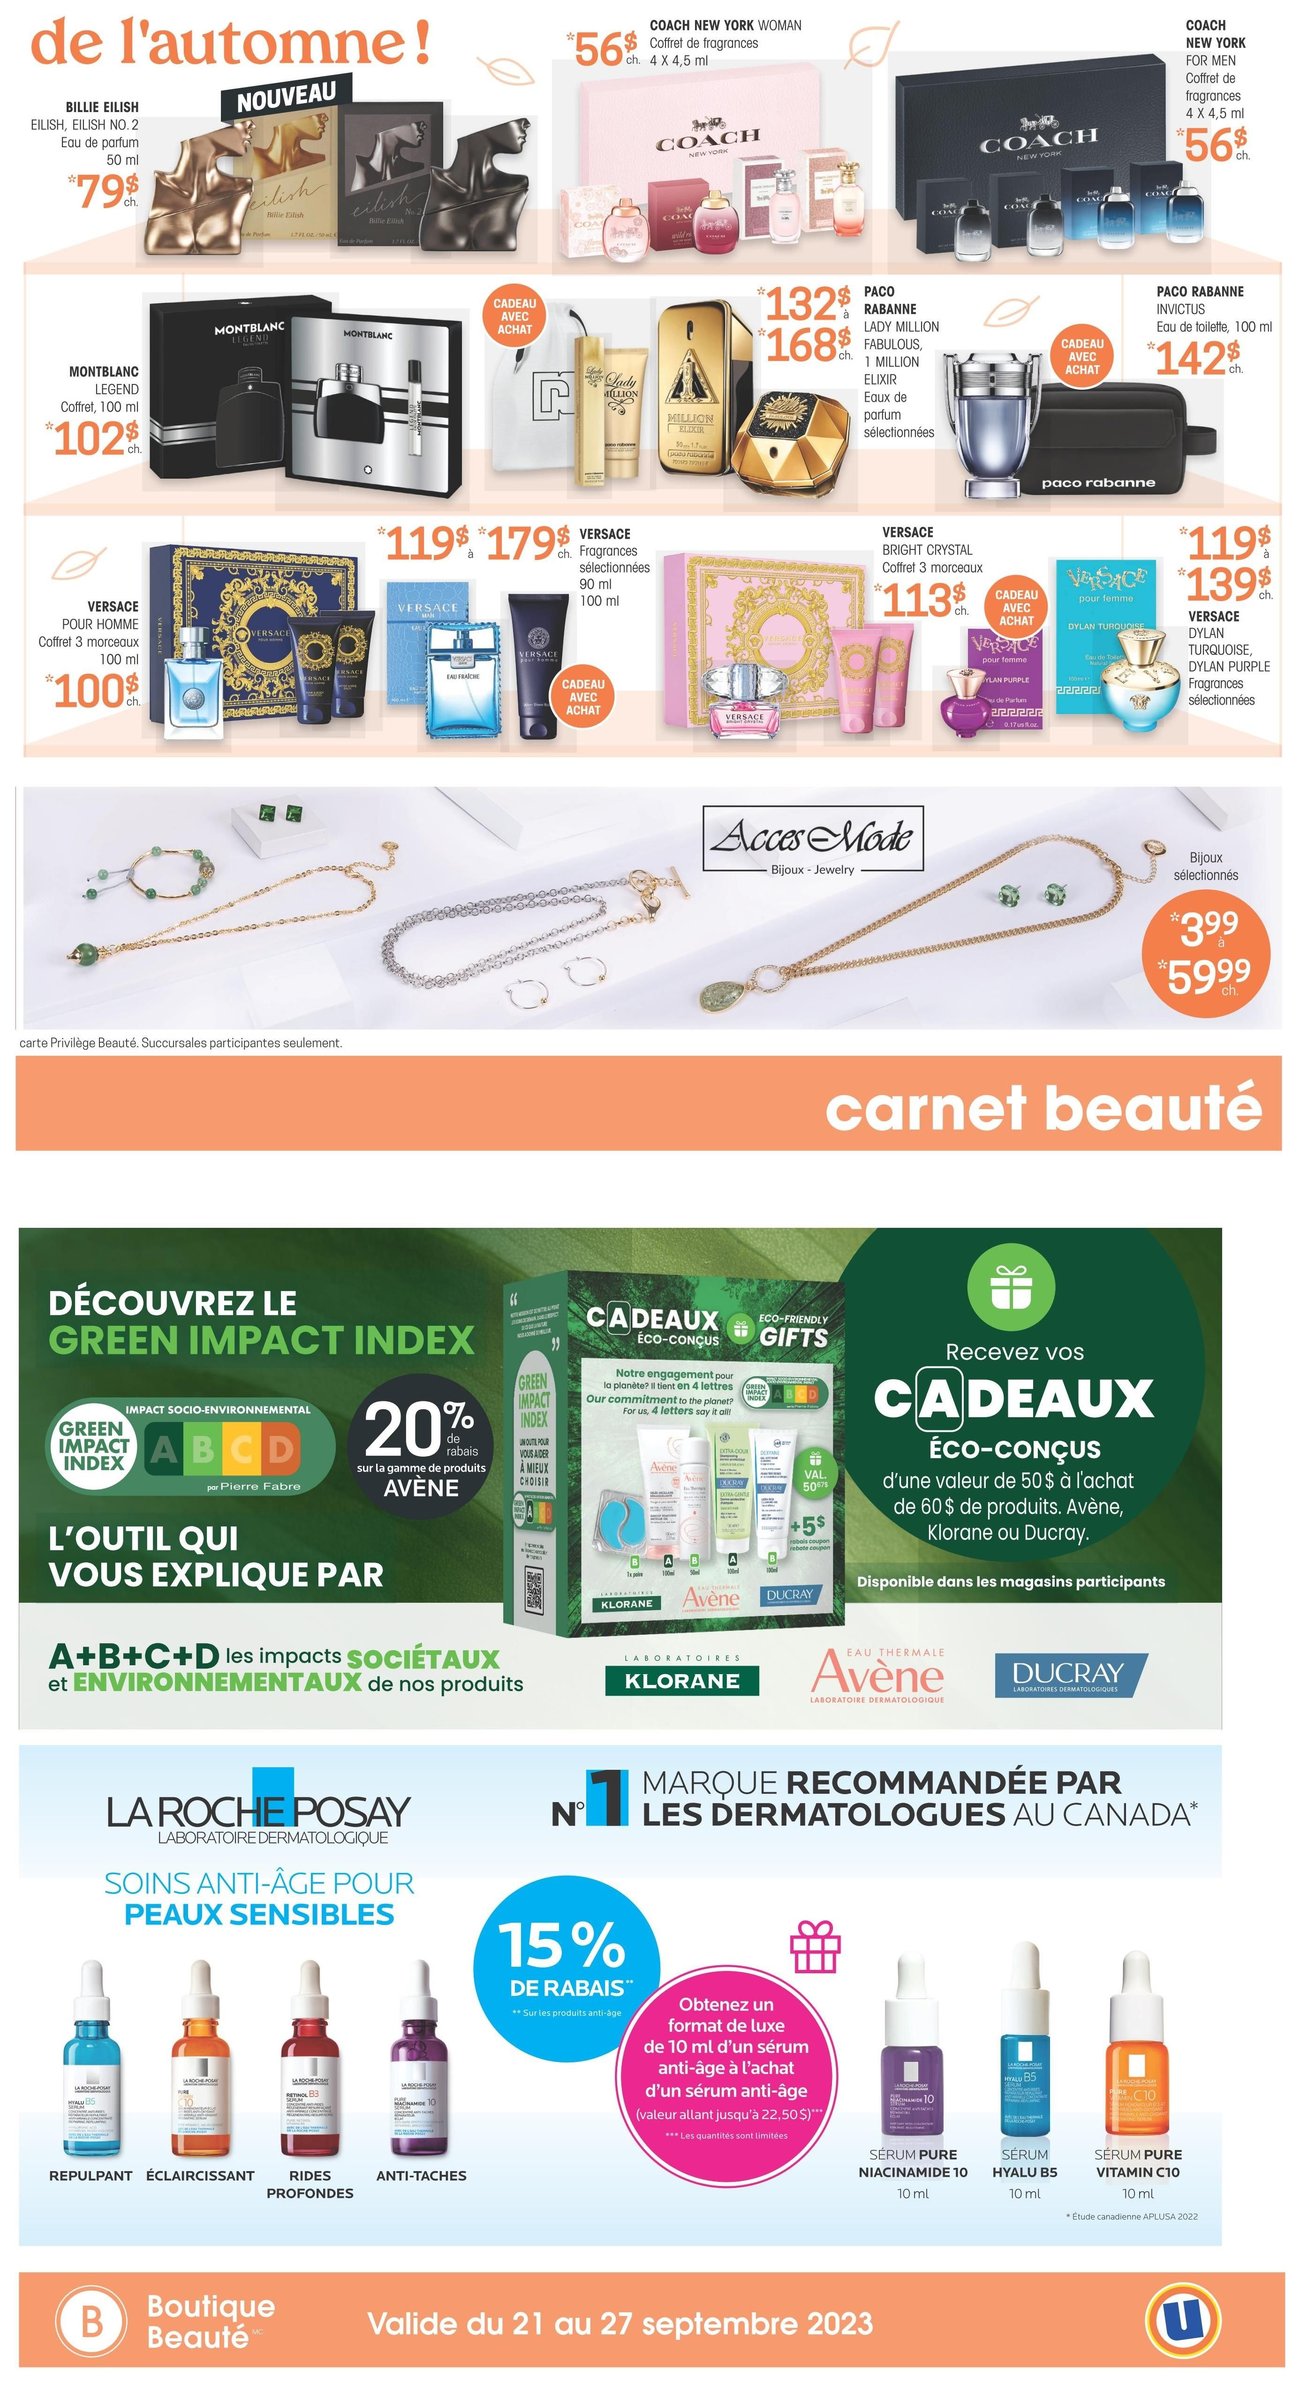 Uniprix - Weekly Flyer Specials - Page 9